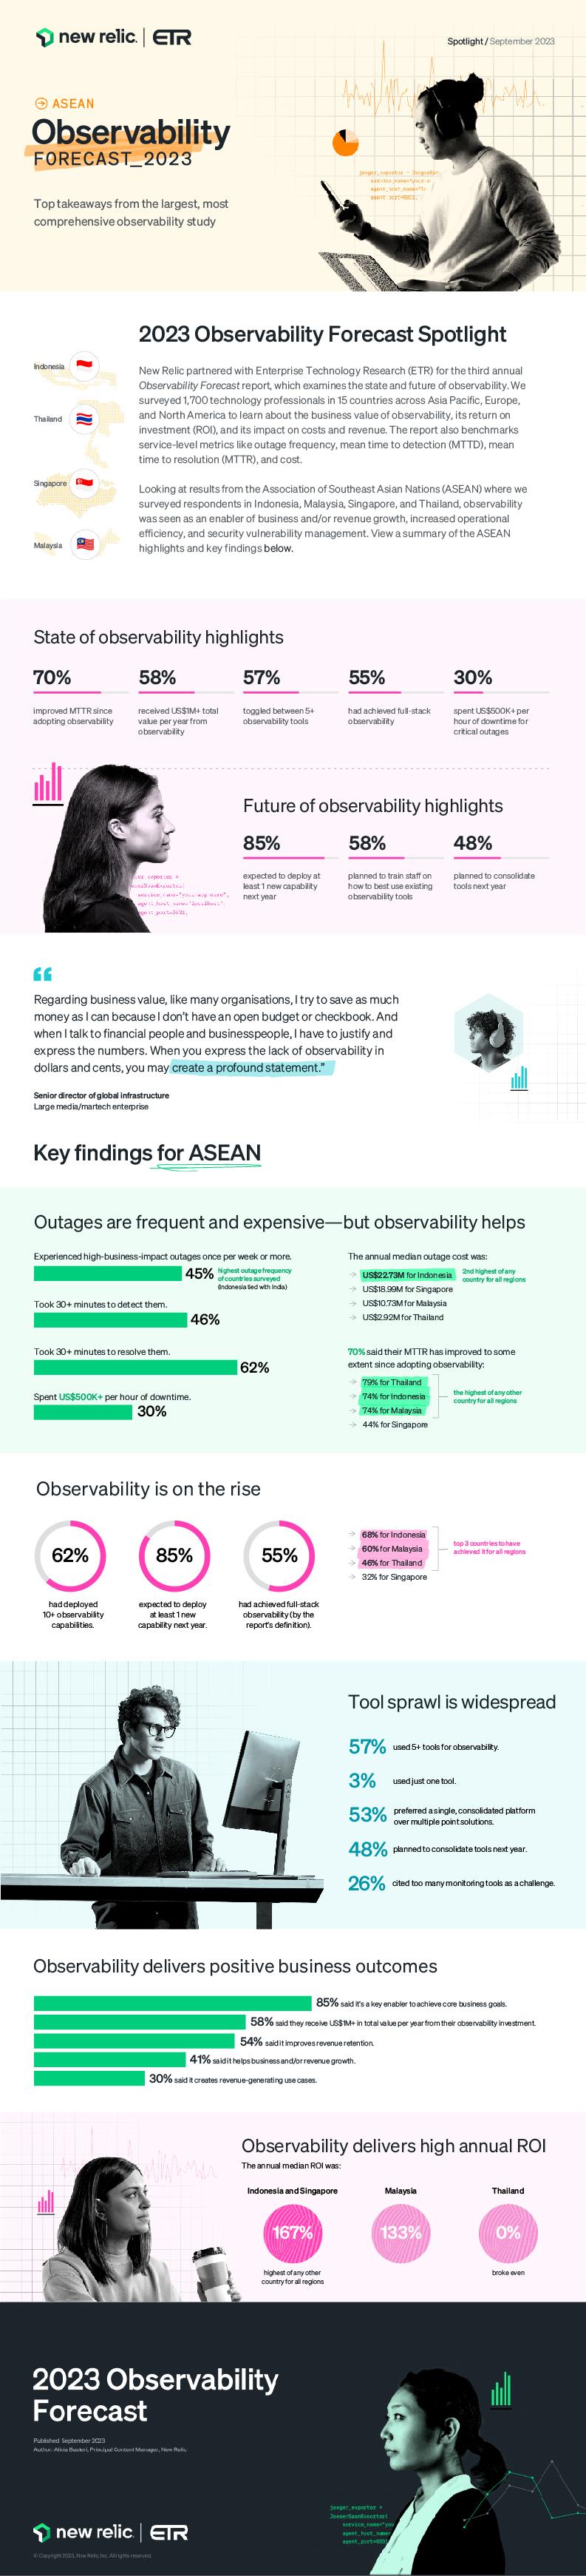 New Relic observability forecast infographic ASEAN